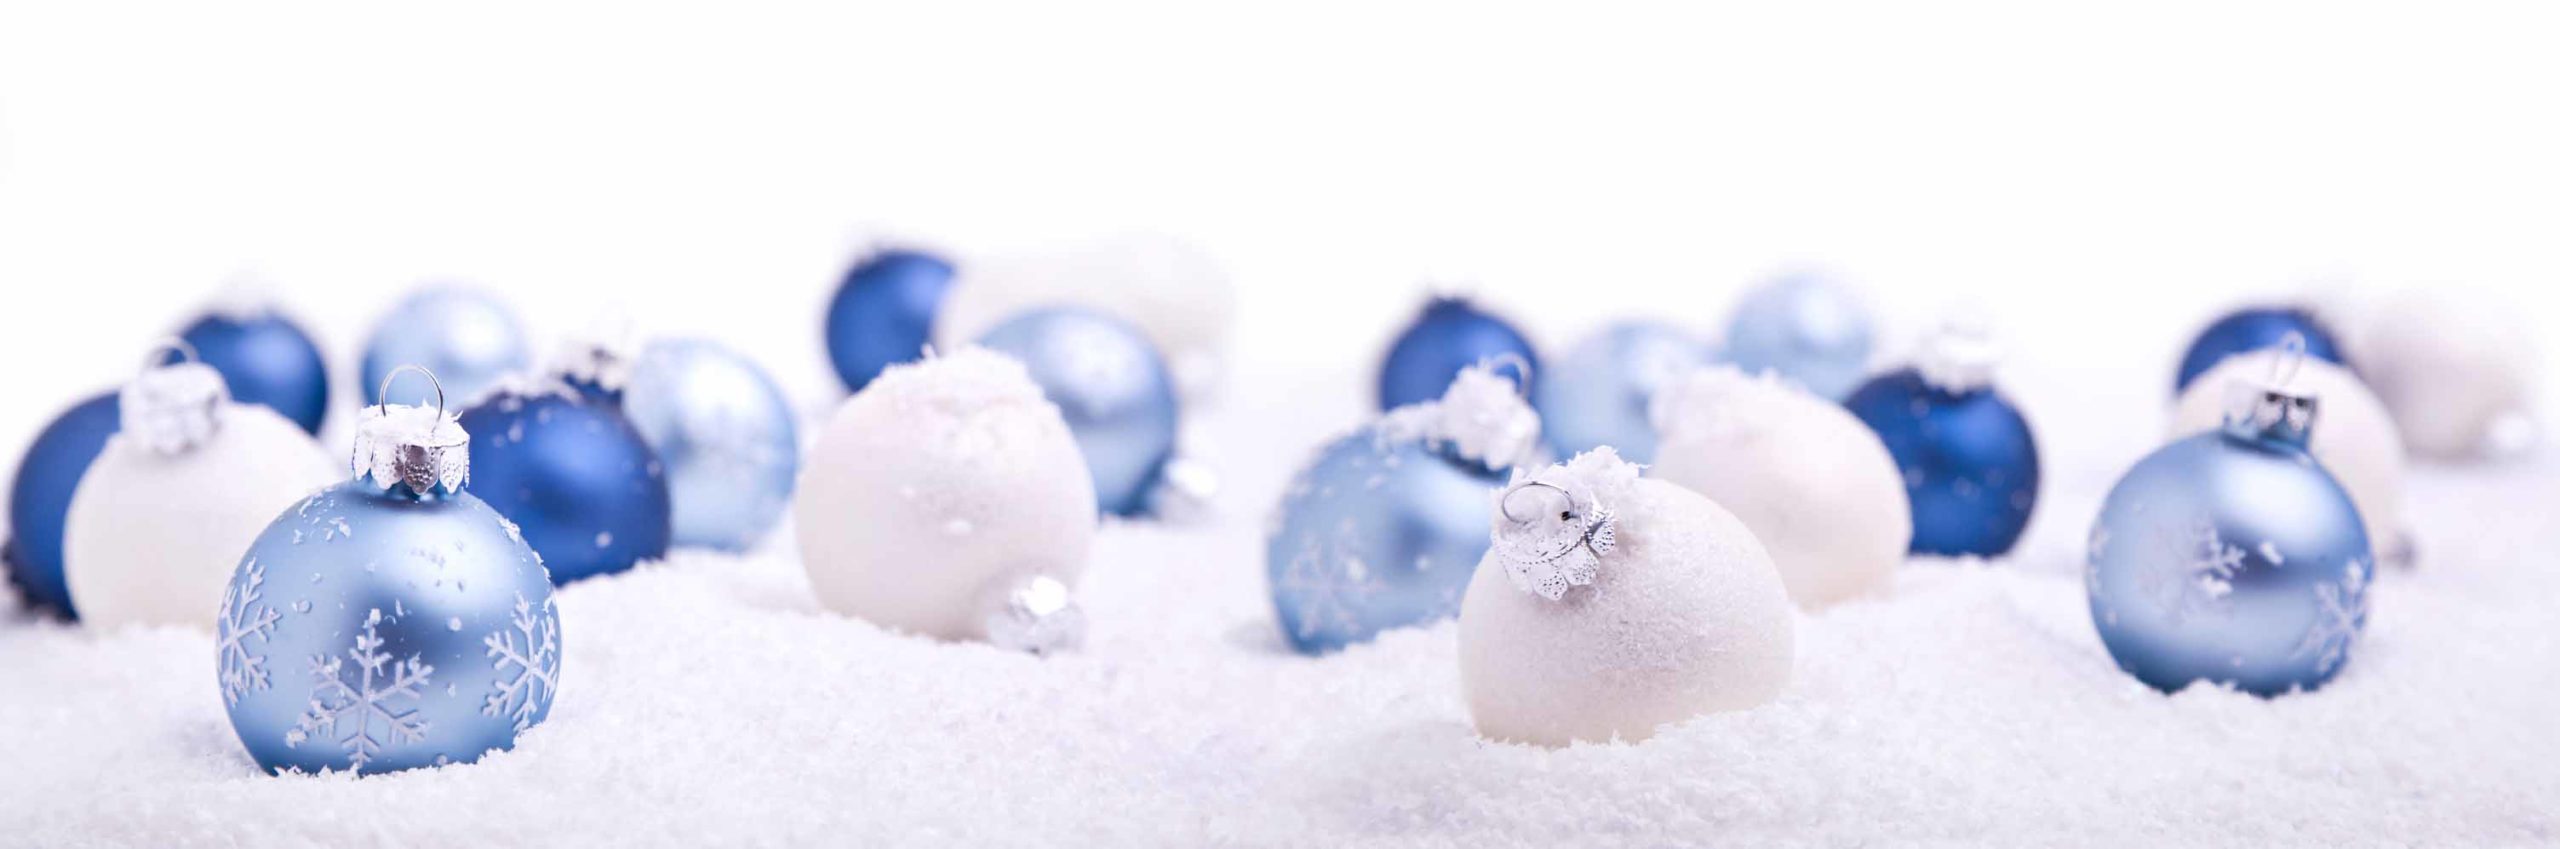 Christmas balls in light blue and white on snowy background